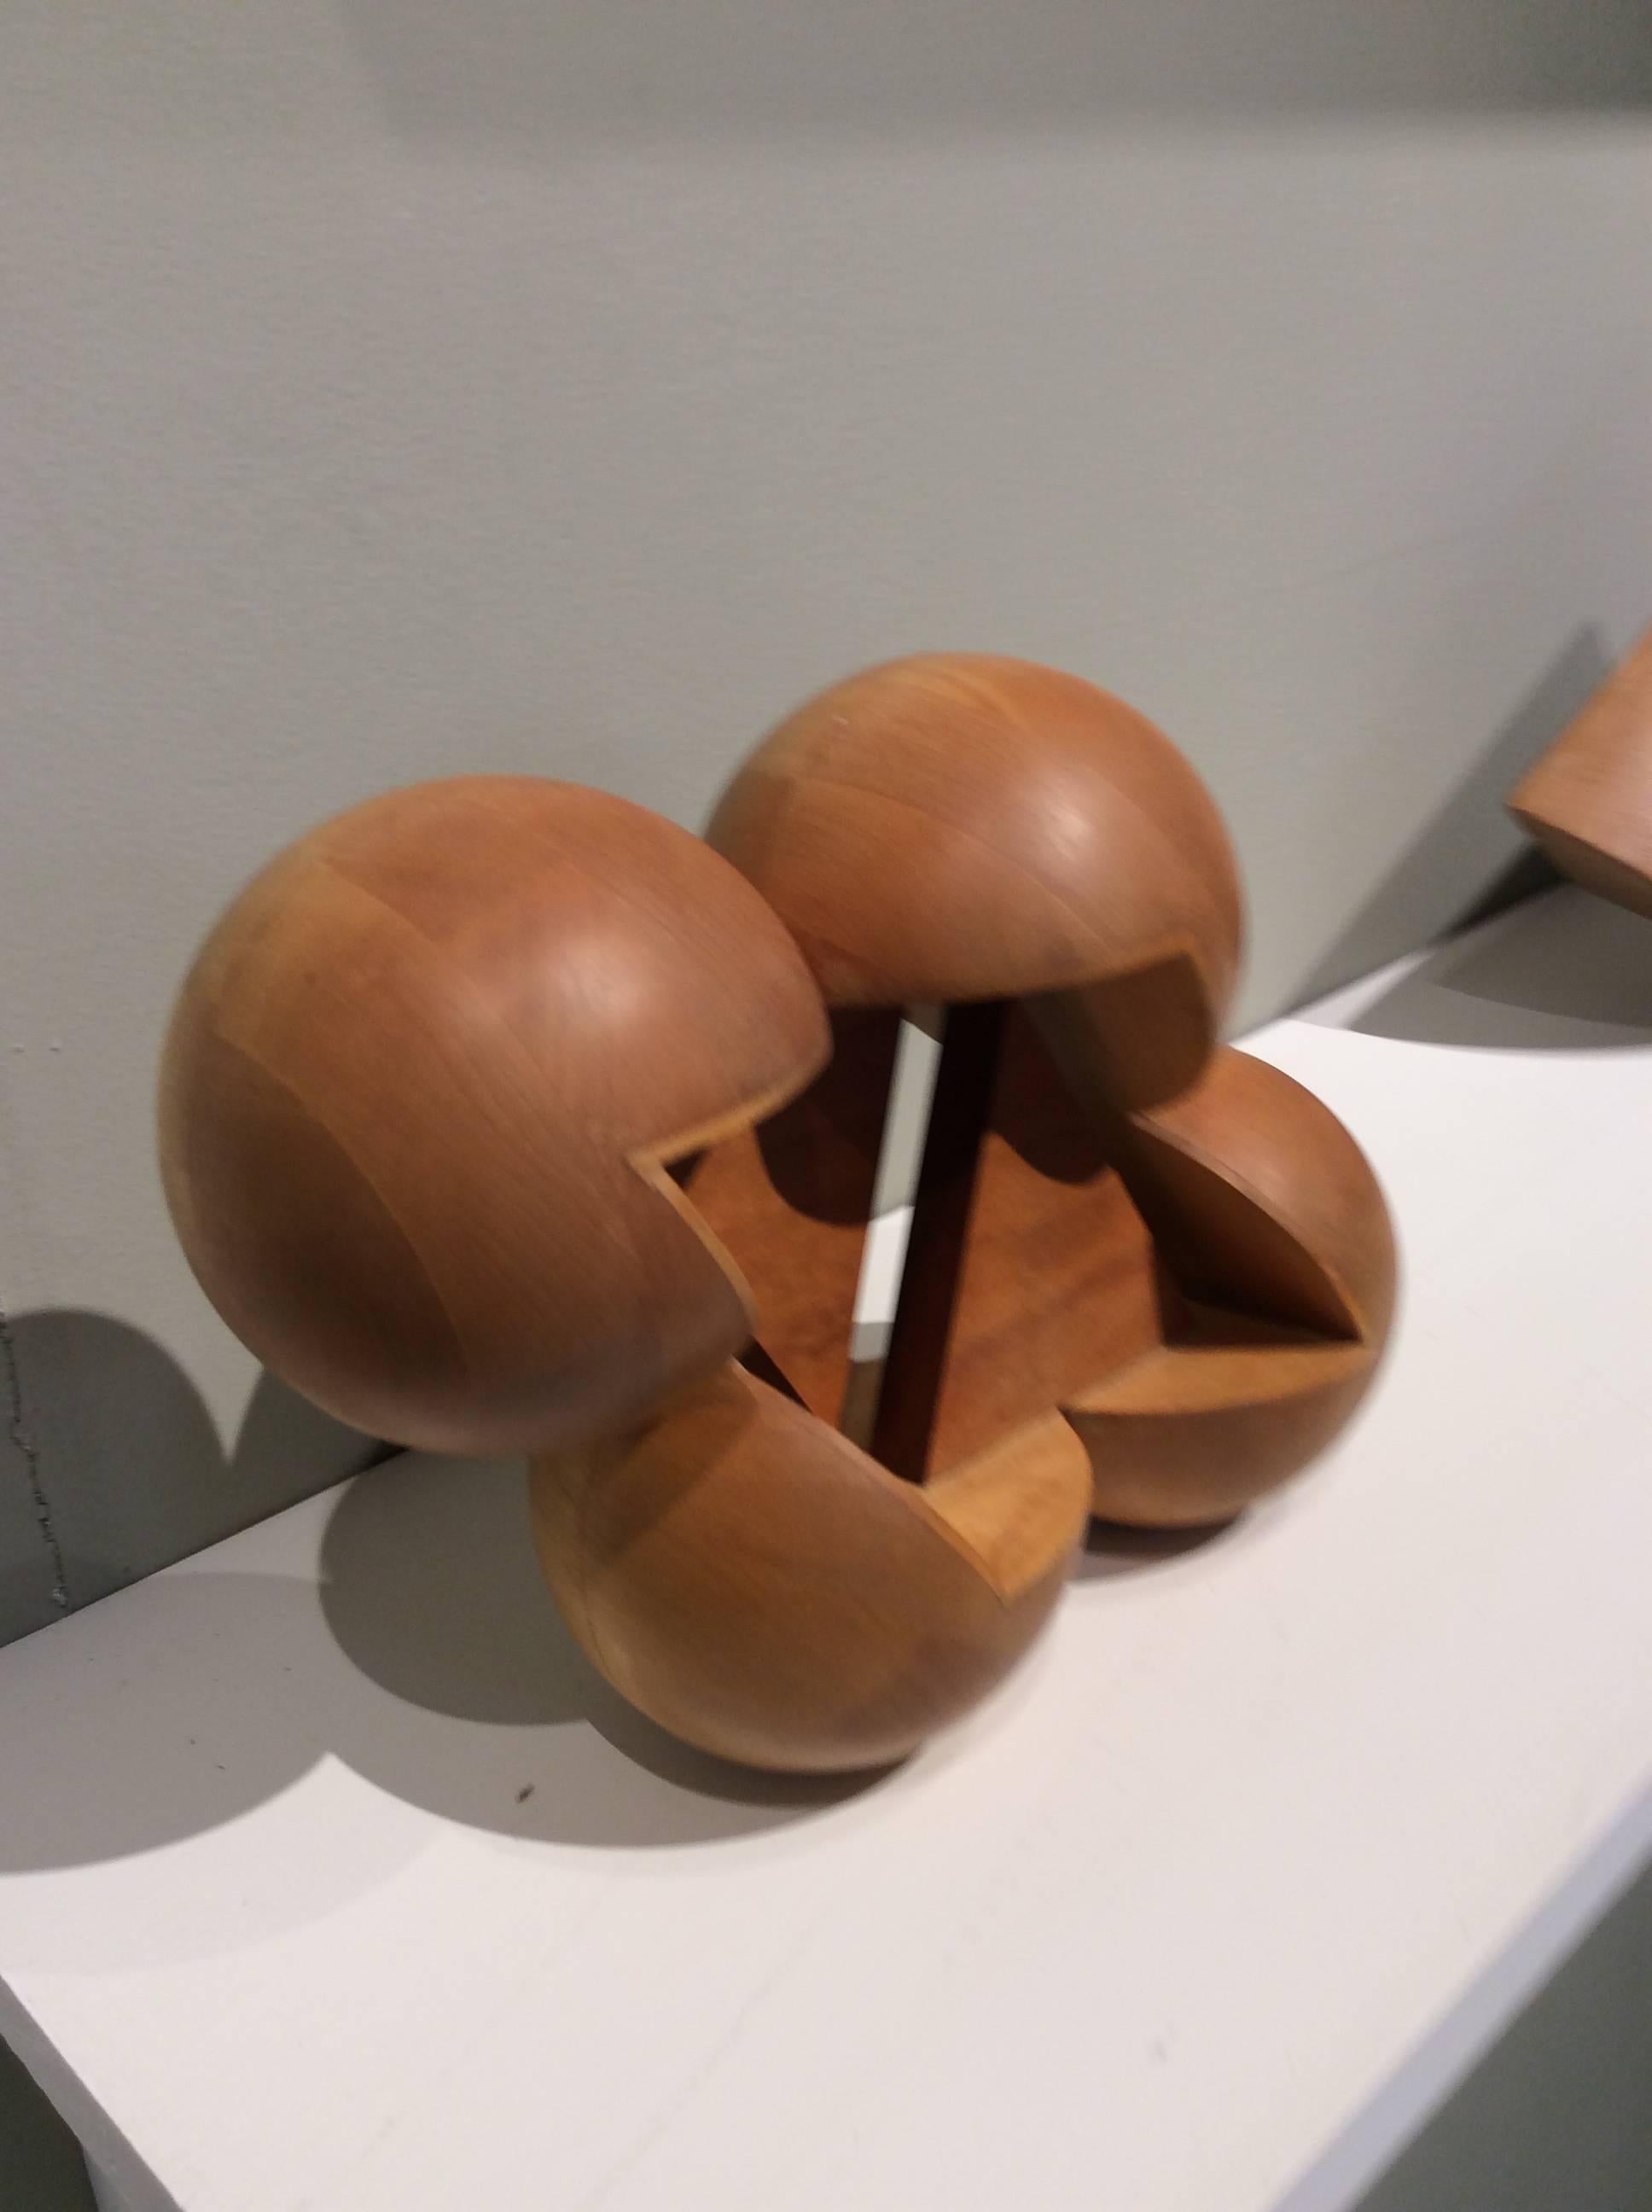 Fair Ball (Abstract Mid Century Modern Inspired Small Wooden Tabletop Sculpture) 1